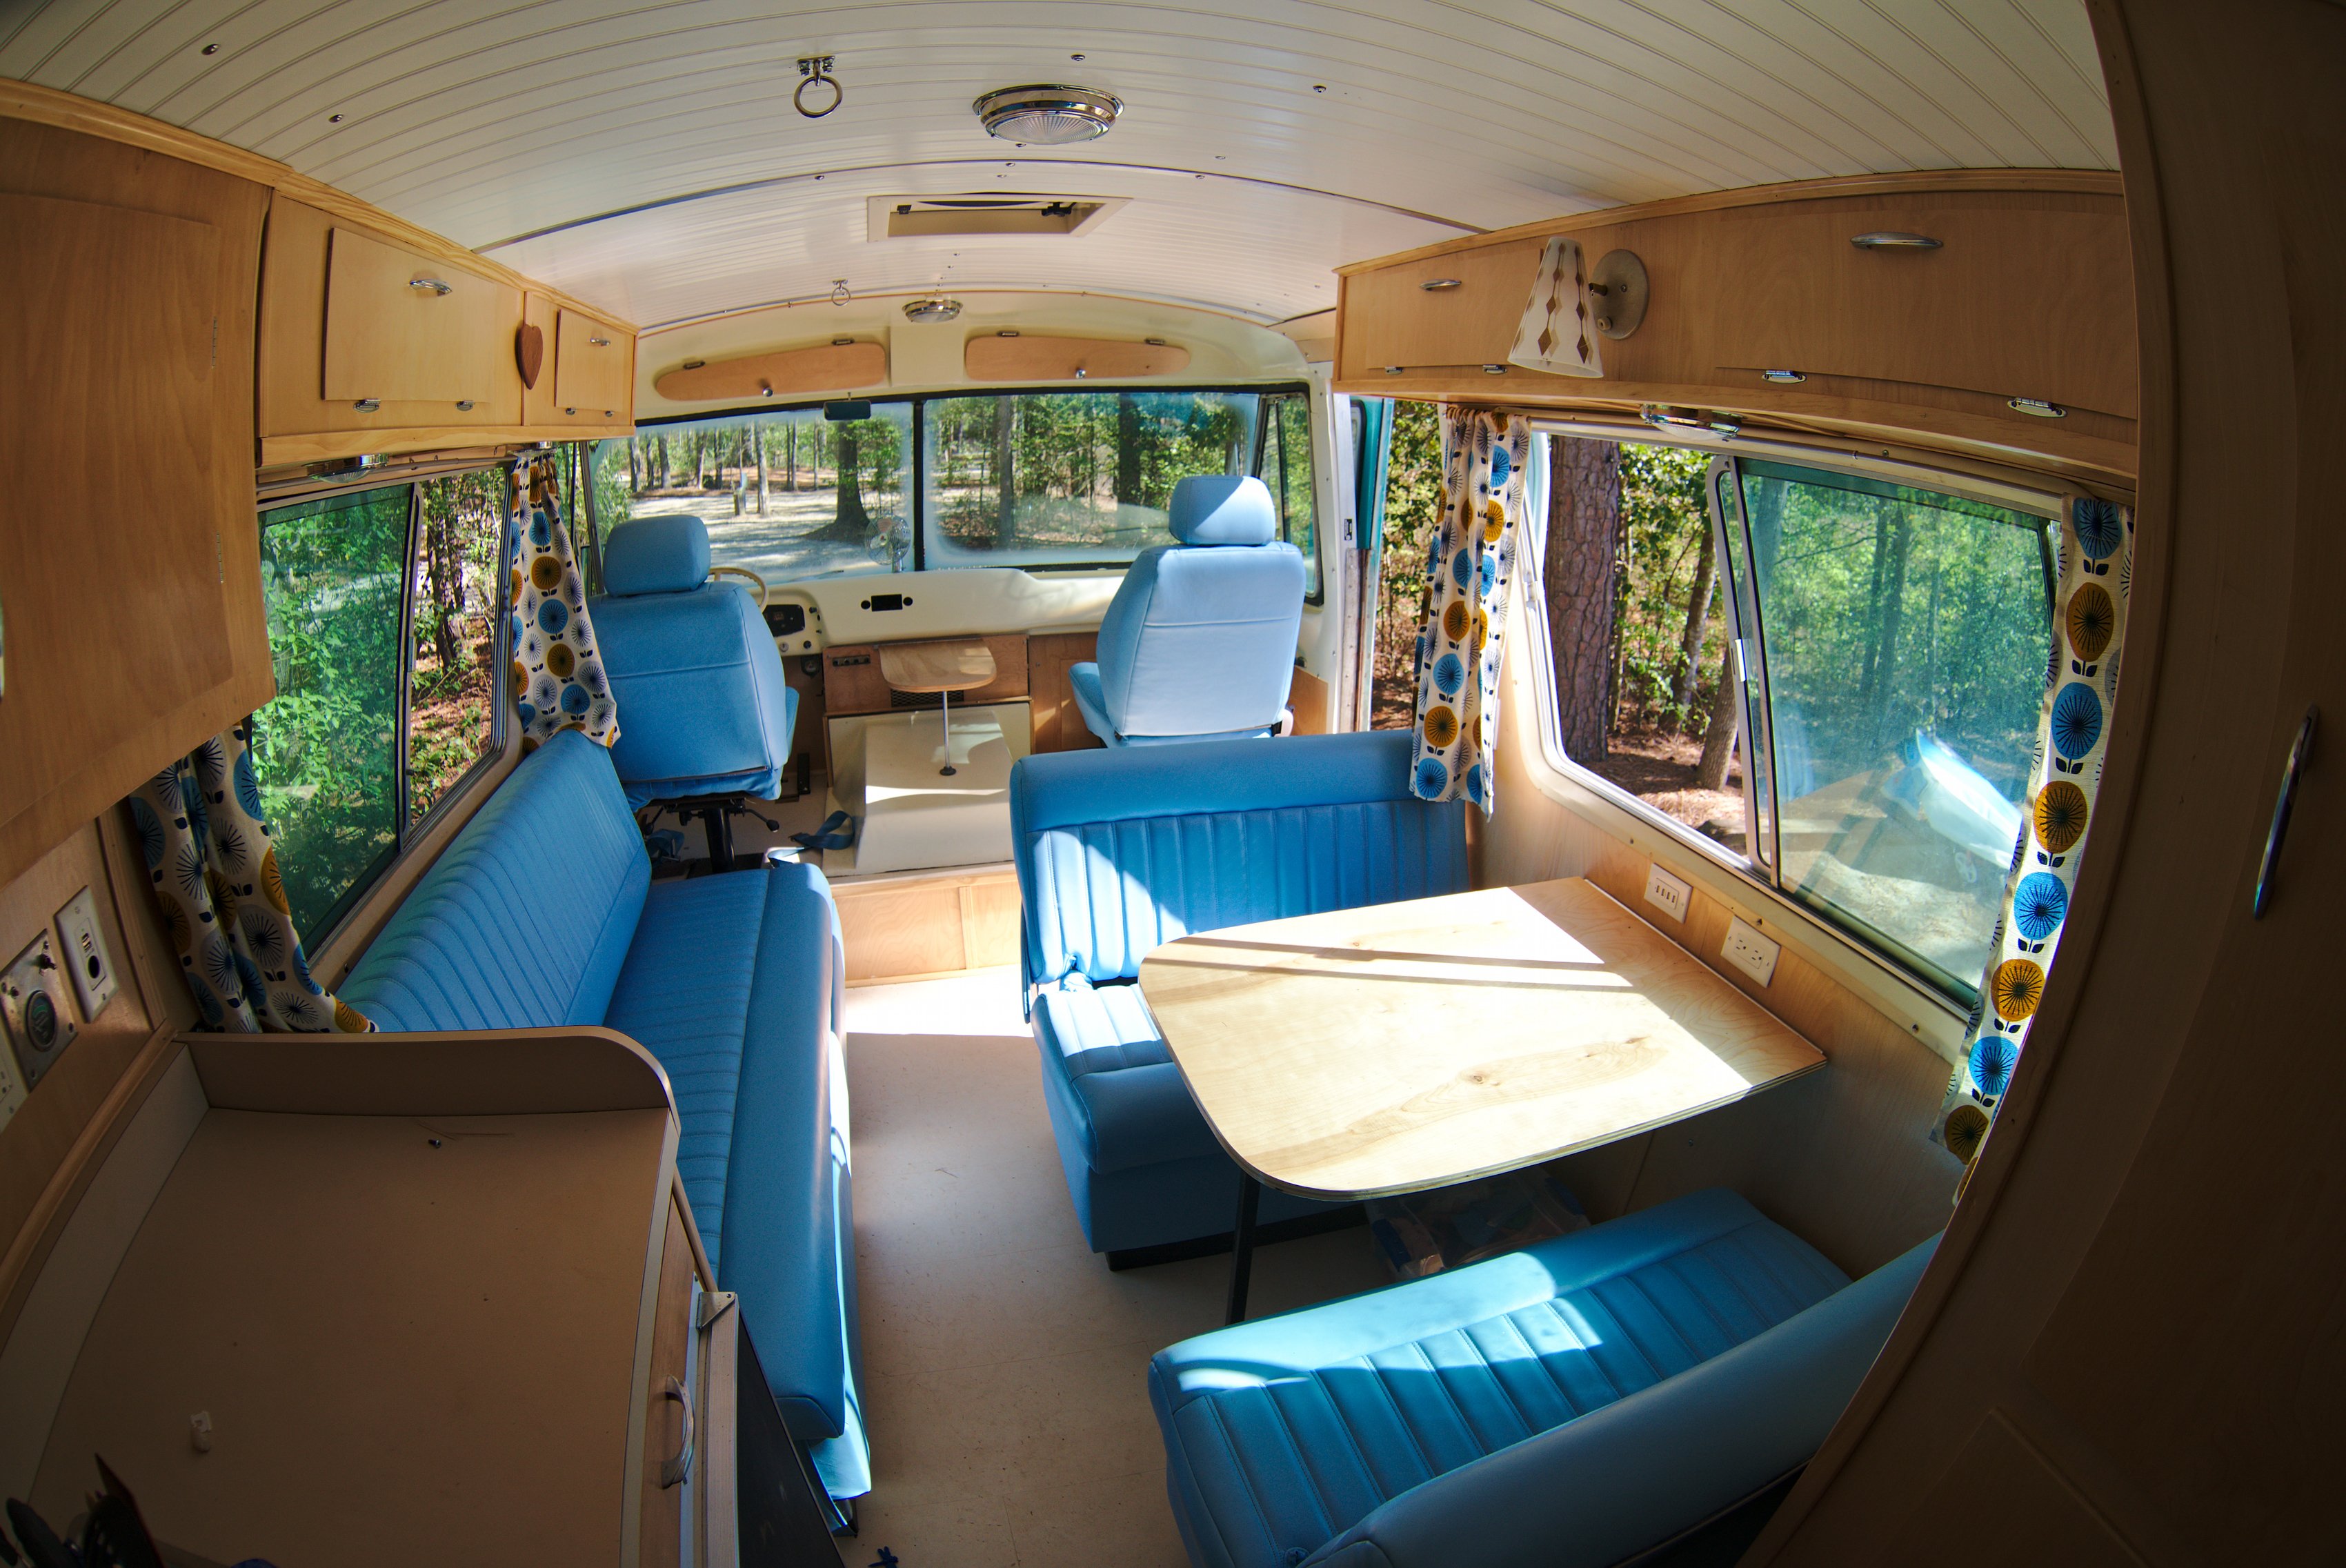 What’s it like to live in a 1969 Dodge Travco Motorhome? 